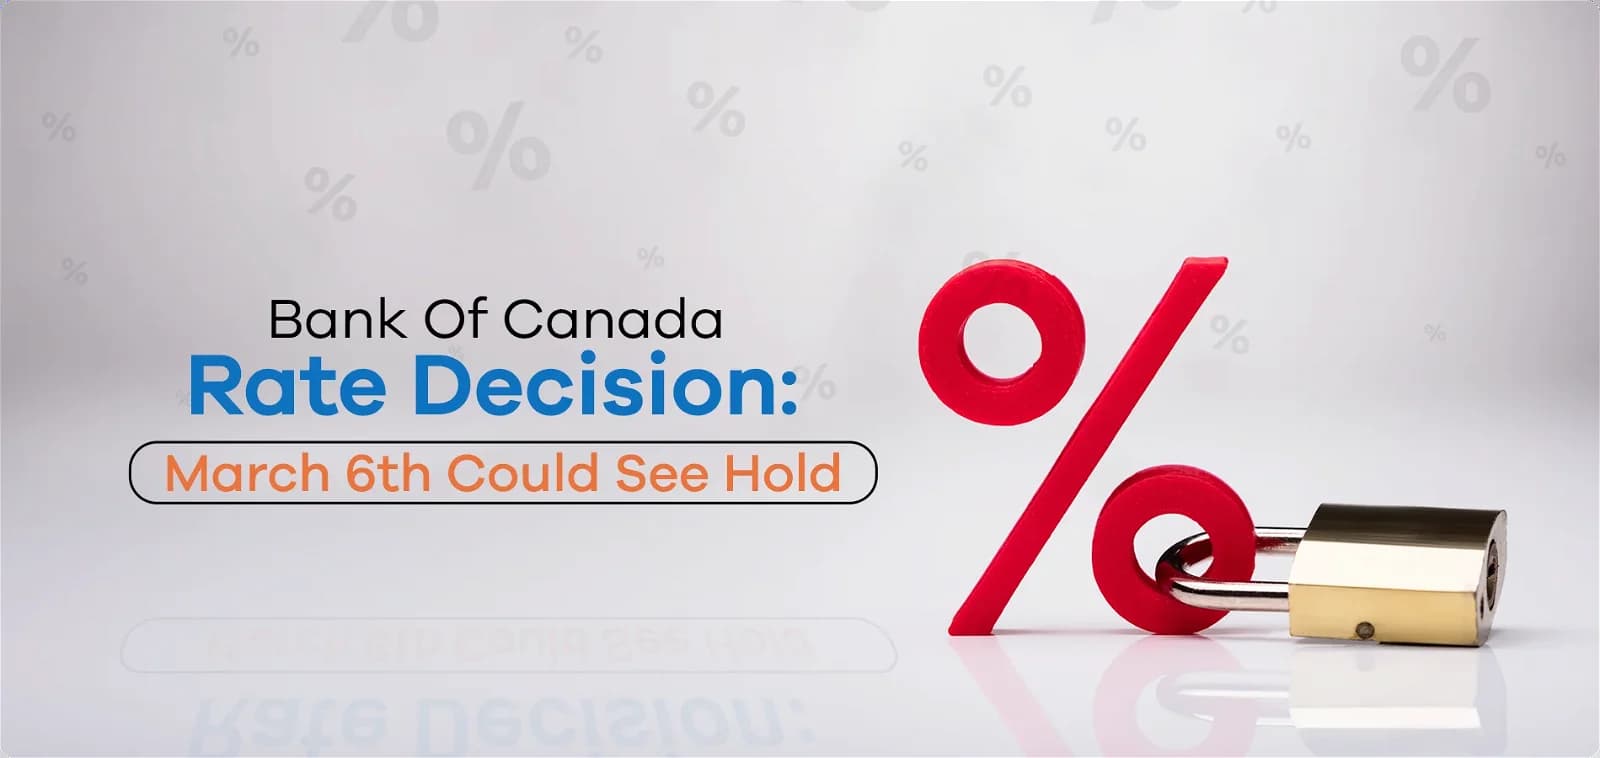 Bank of Canada Interest Rate Announcement On March 6 - What will happen?